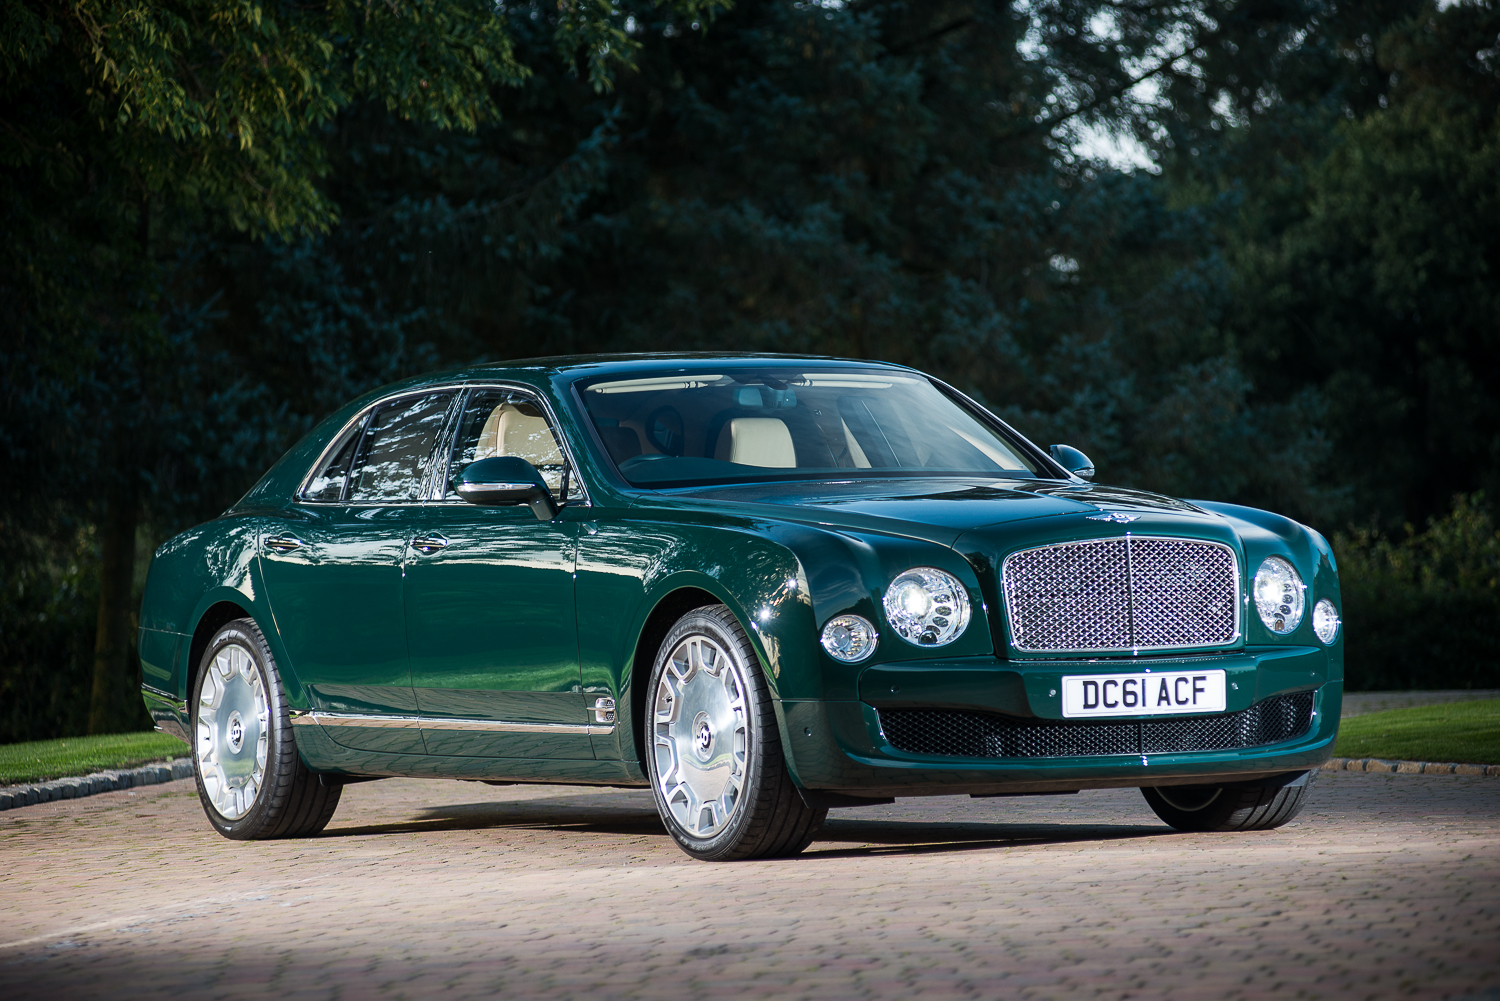 2012 Bentley Mulsanne - Formerly the Personal Conveyance of HM The Queen.jpg